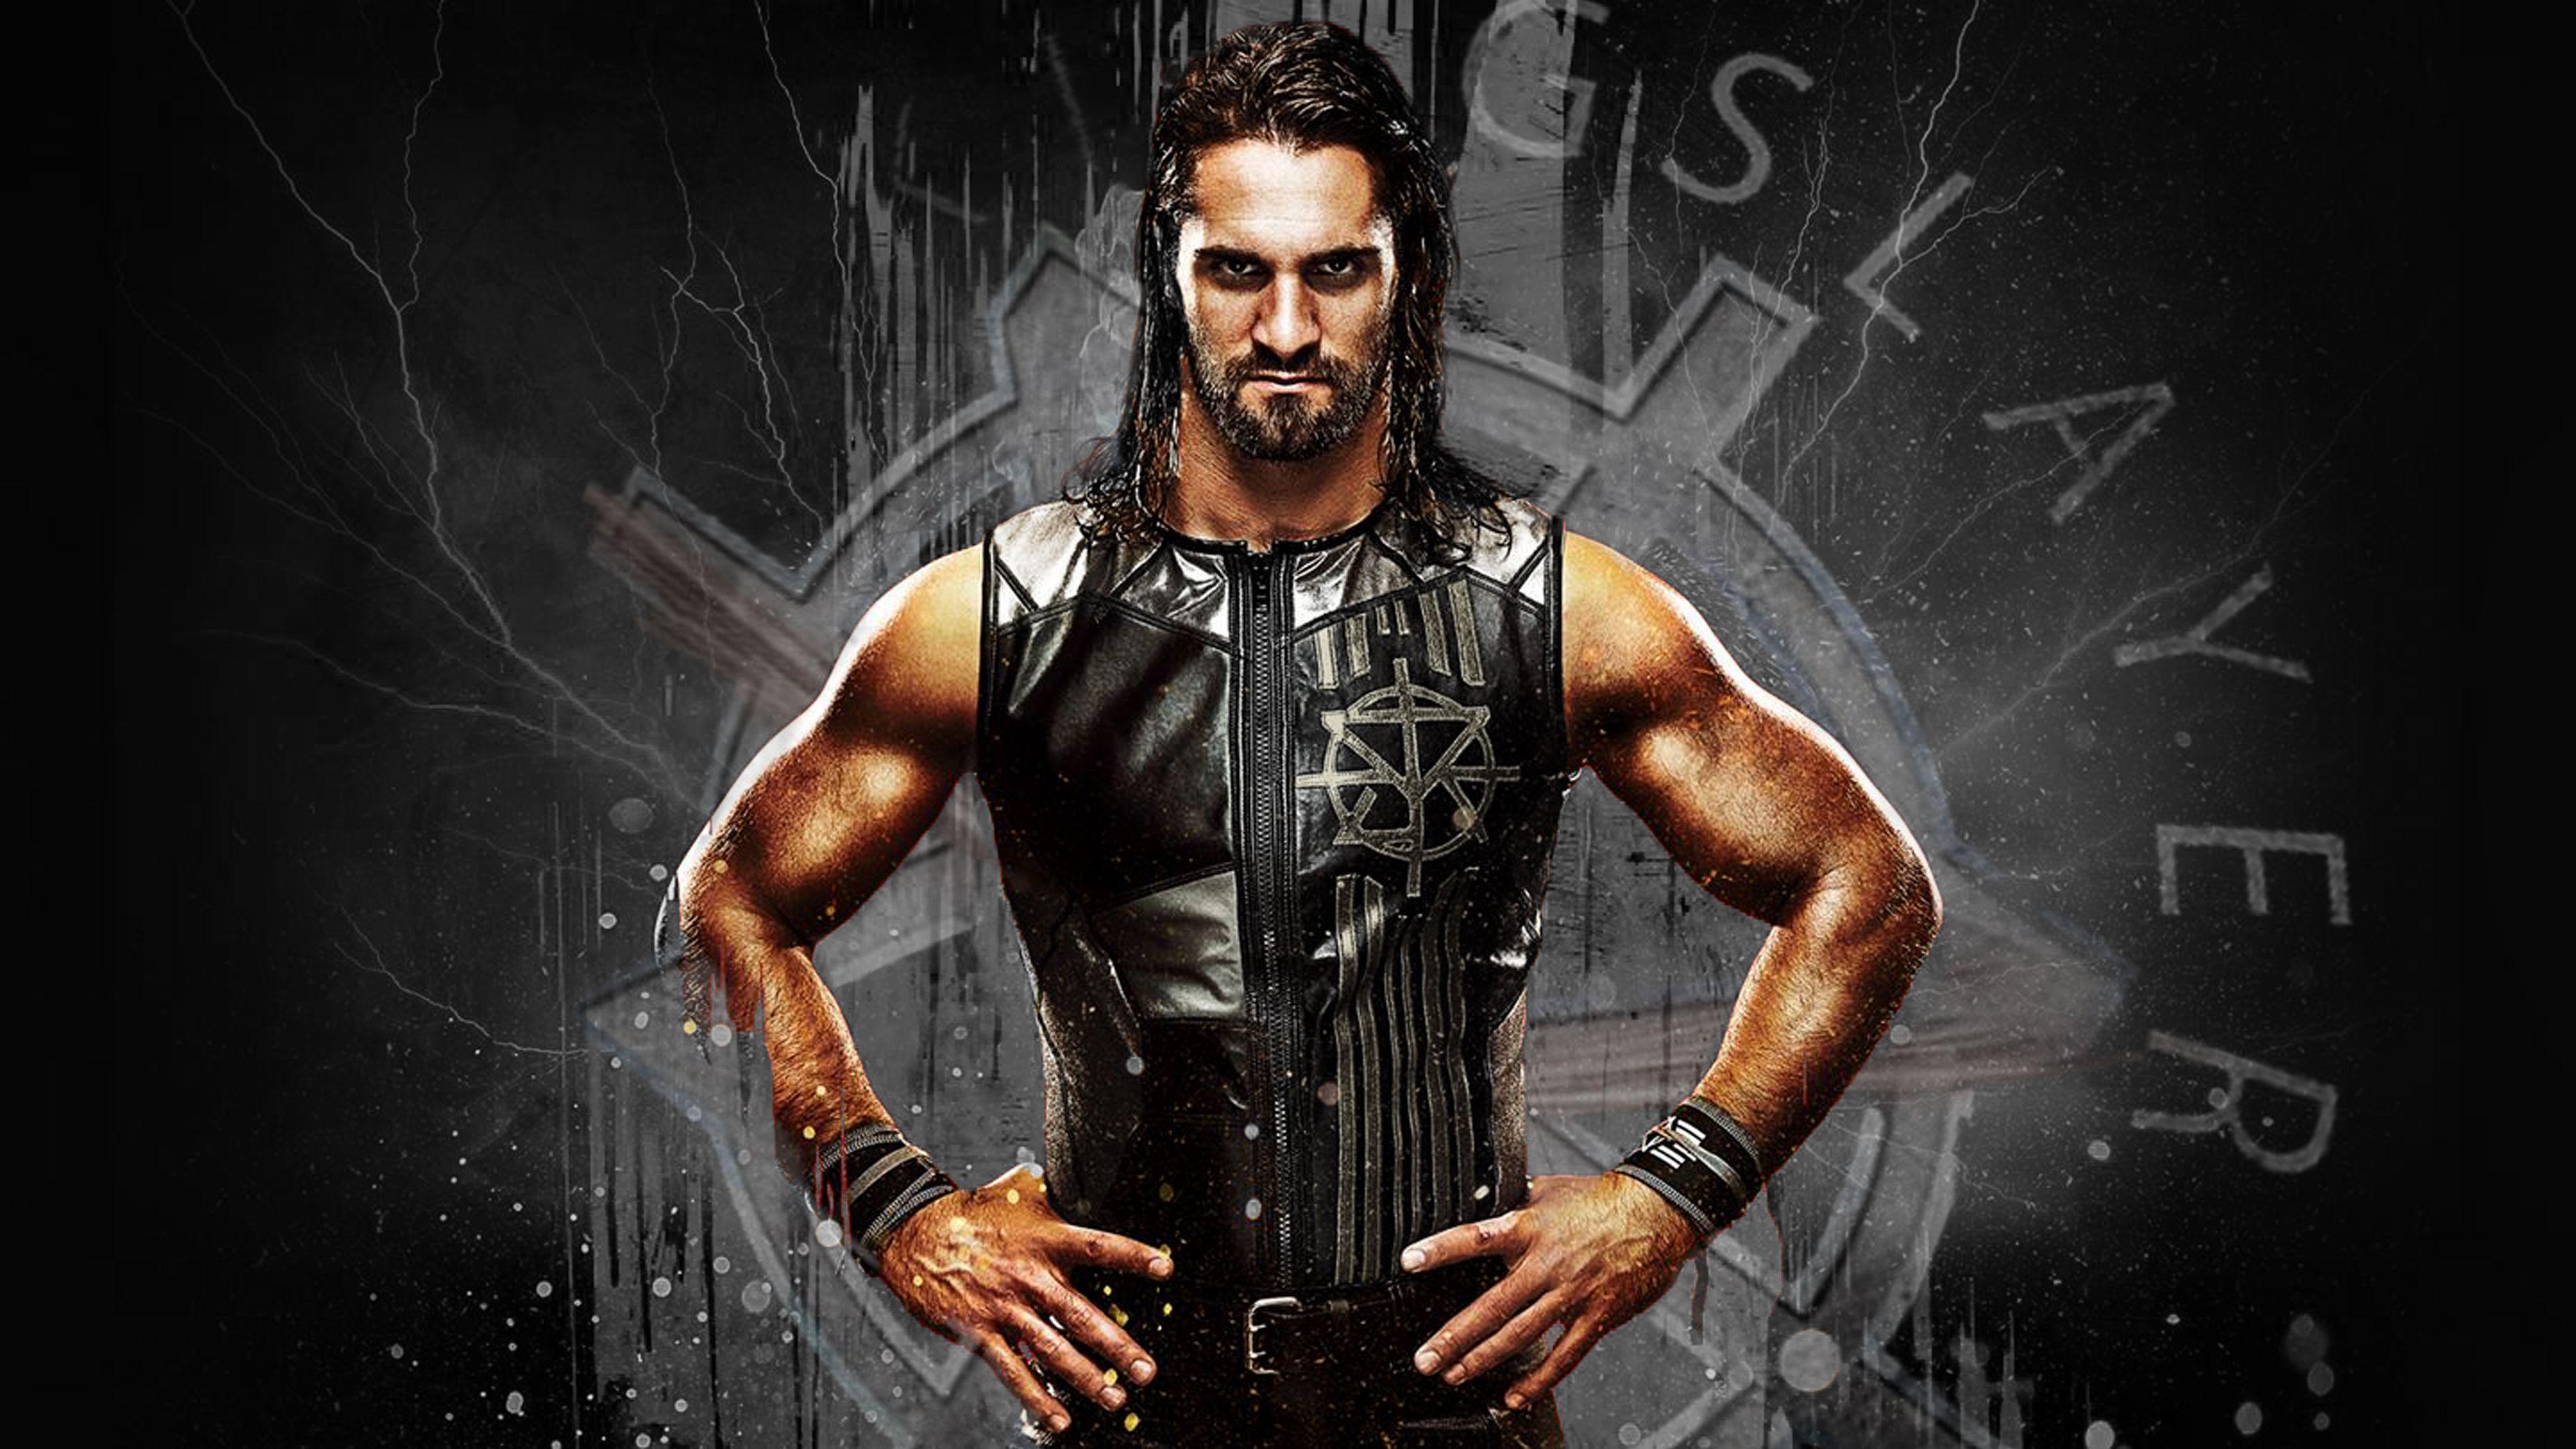 Seth Rollins Latest 4K Wallpaper, New Picture and Ultra HD